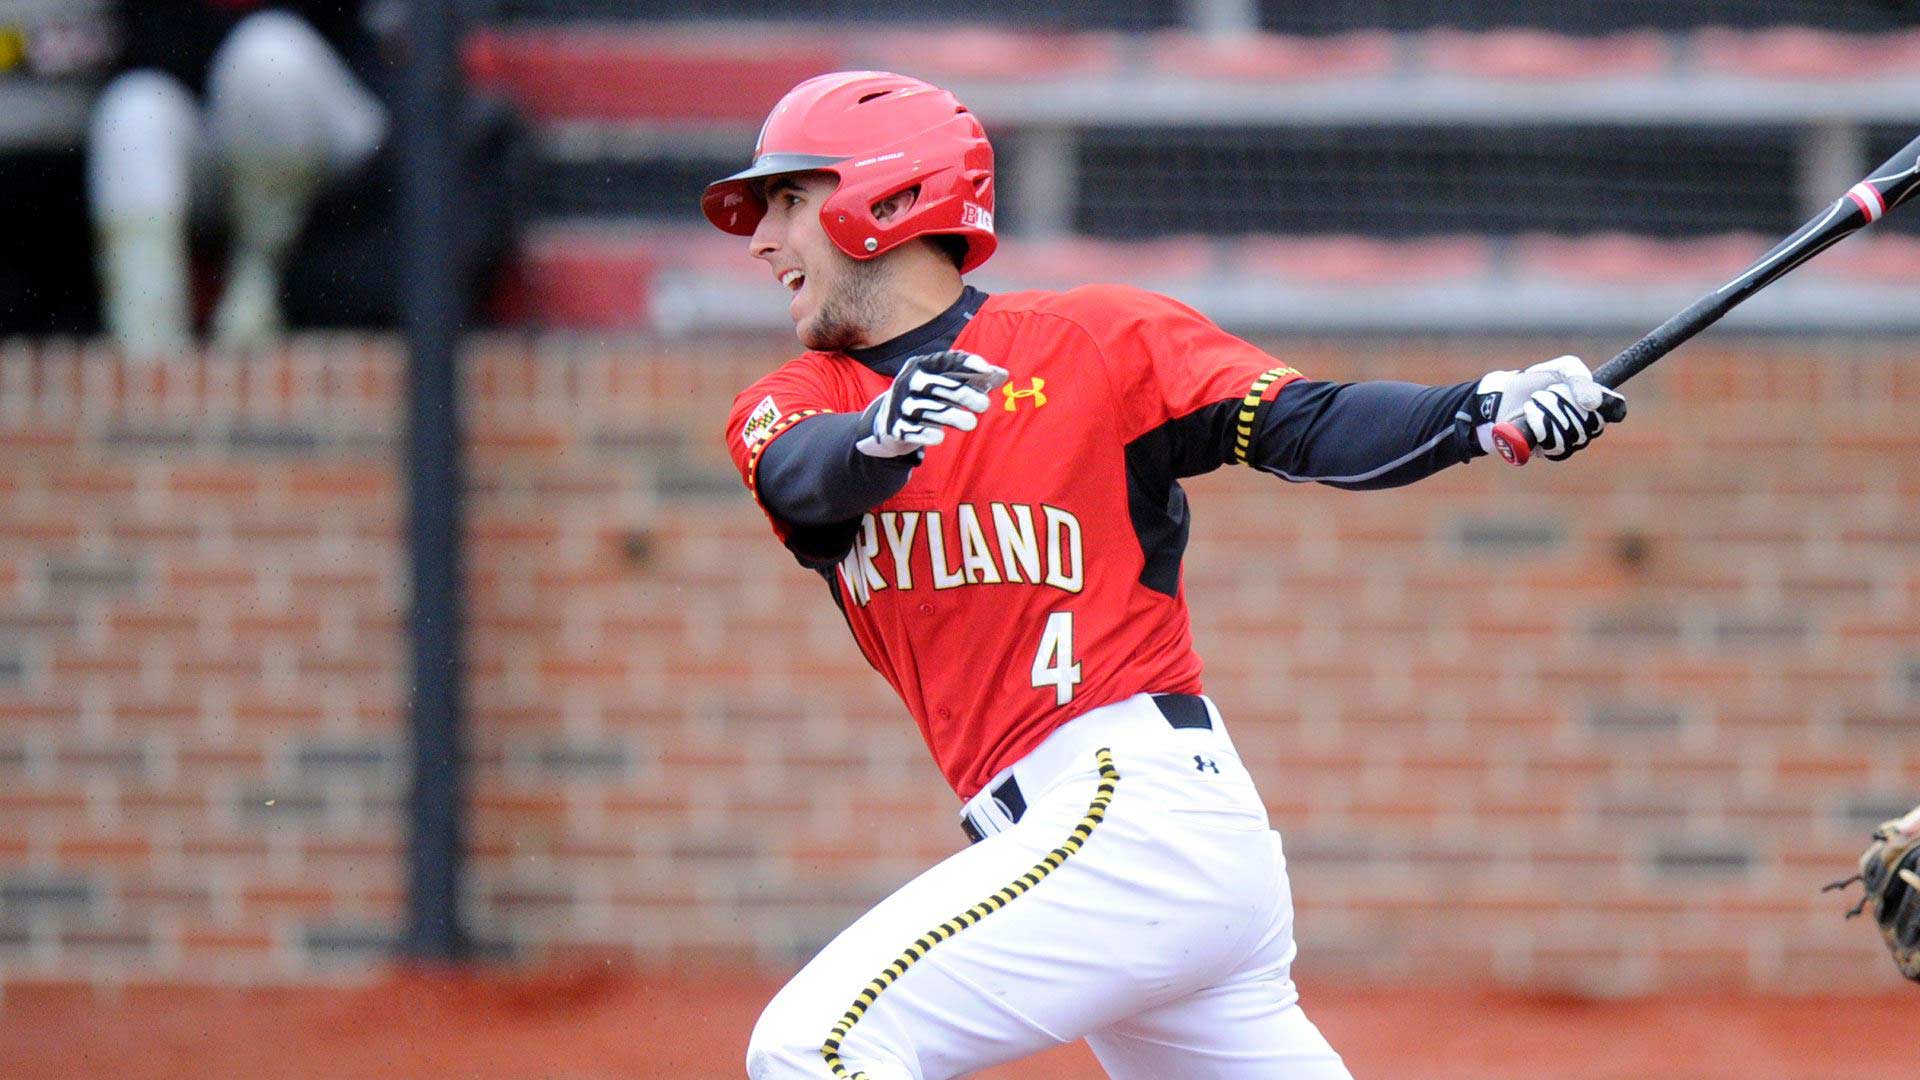 Kevin Smith playing baseball for Maryland